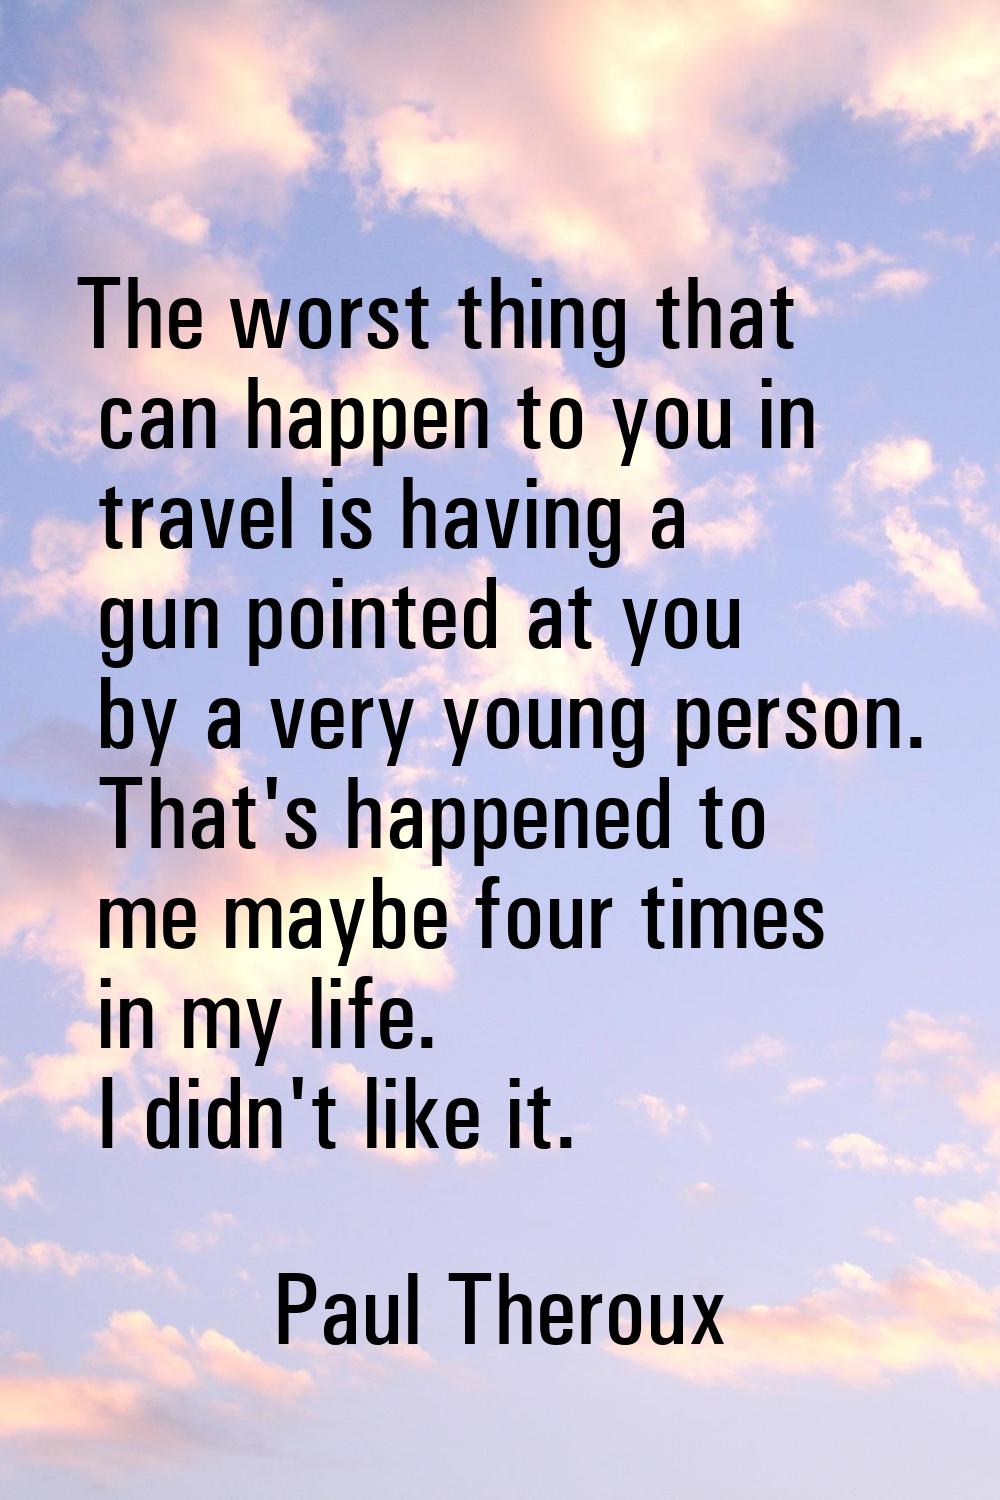 The worst thing that can happen to you in travel is having a gun pointed at you by a very young per